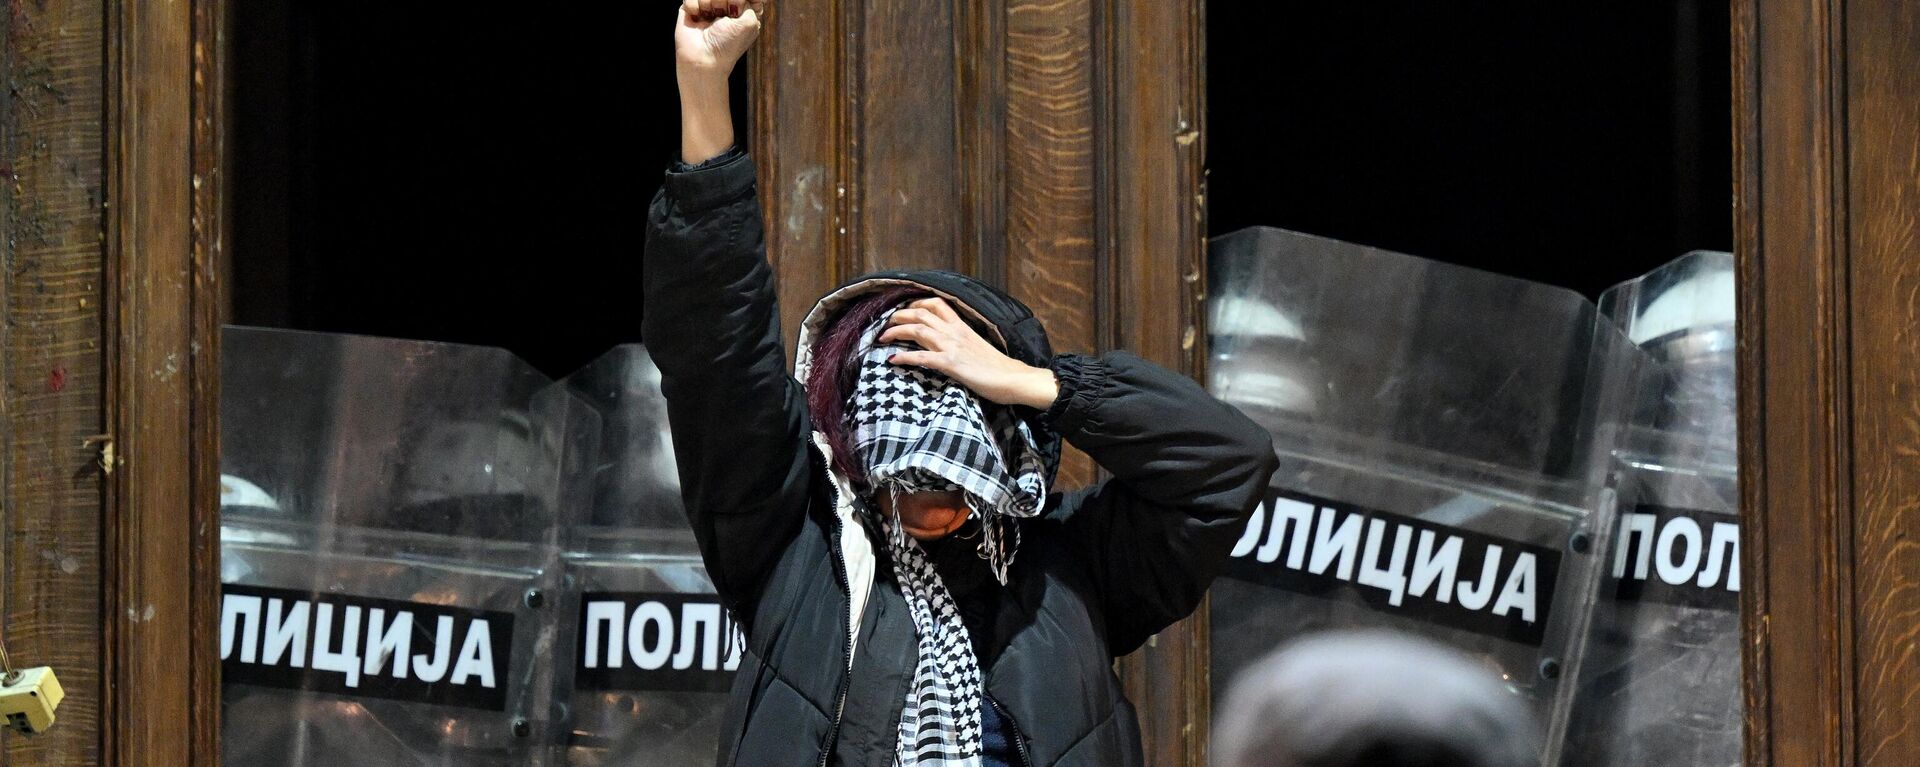 A protester raises a fist as police officers guard the entrance to the Belgrade's city council building during a demonstration in Belgrade, on December 24, 2023, a week after the parliamentary and local elections in Serbia. - Sputnik Africa, 1920, 25.12.2023